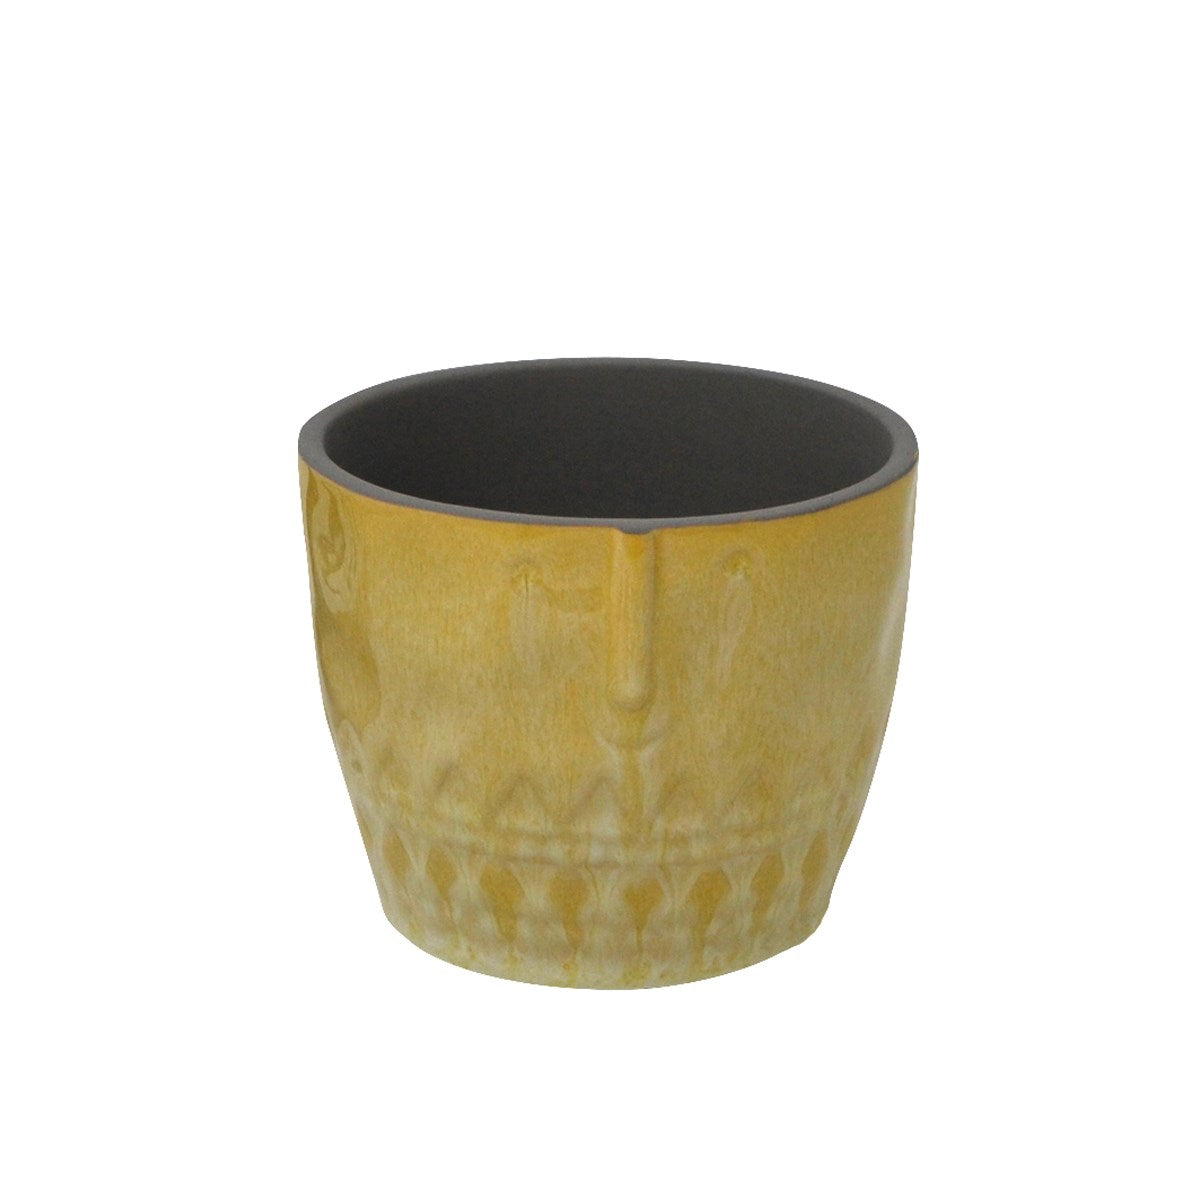 This decorative ceramic pot with padded bottom has a yellow coloured exterior with a carved happy face on the top half and and an etched pattern on the lower half.  This pot measures 4" in diameter and is suiable for a 3-3.5" grow/nursery pot.